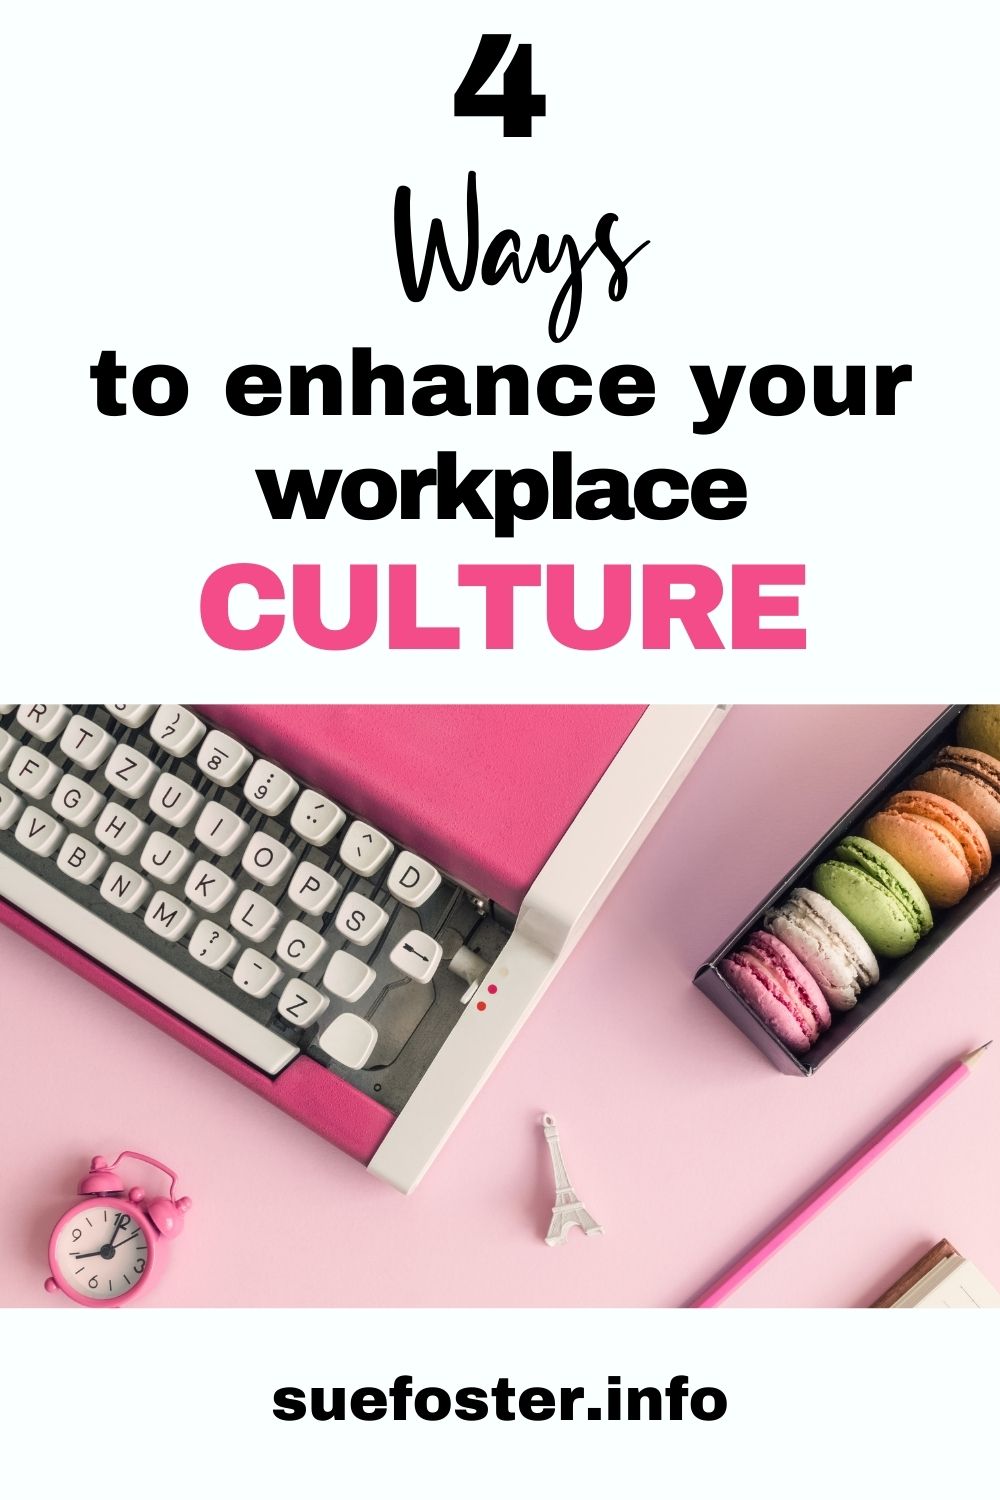 Whether you are actively looking to expand your existing team or you are trying to consolidate your relationship with a few, trusted employees, this is the time to create a workplace culture worth staying for.